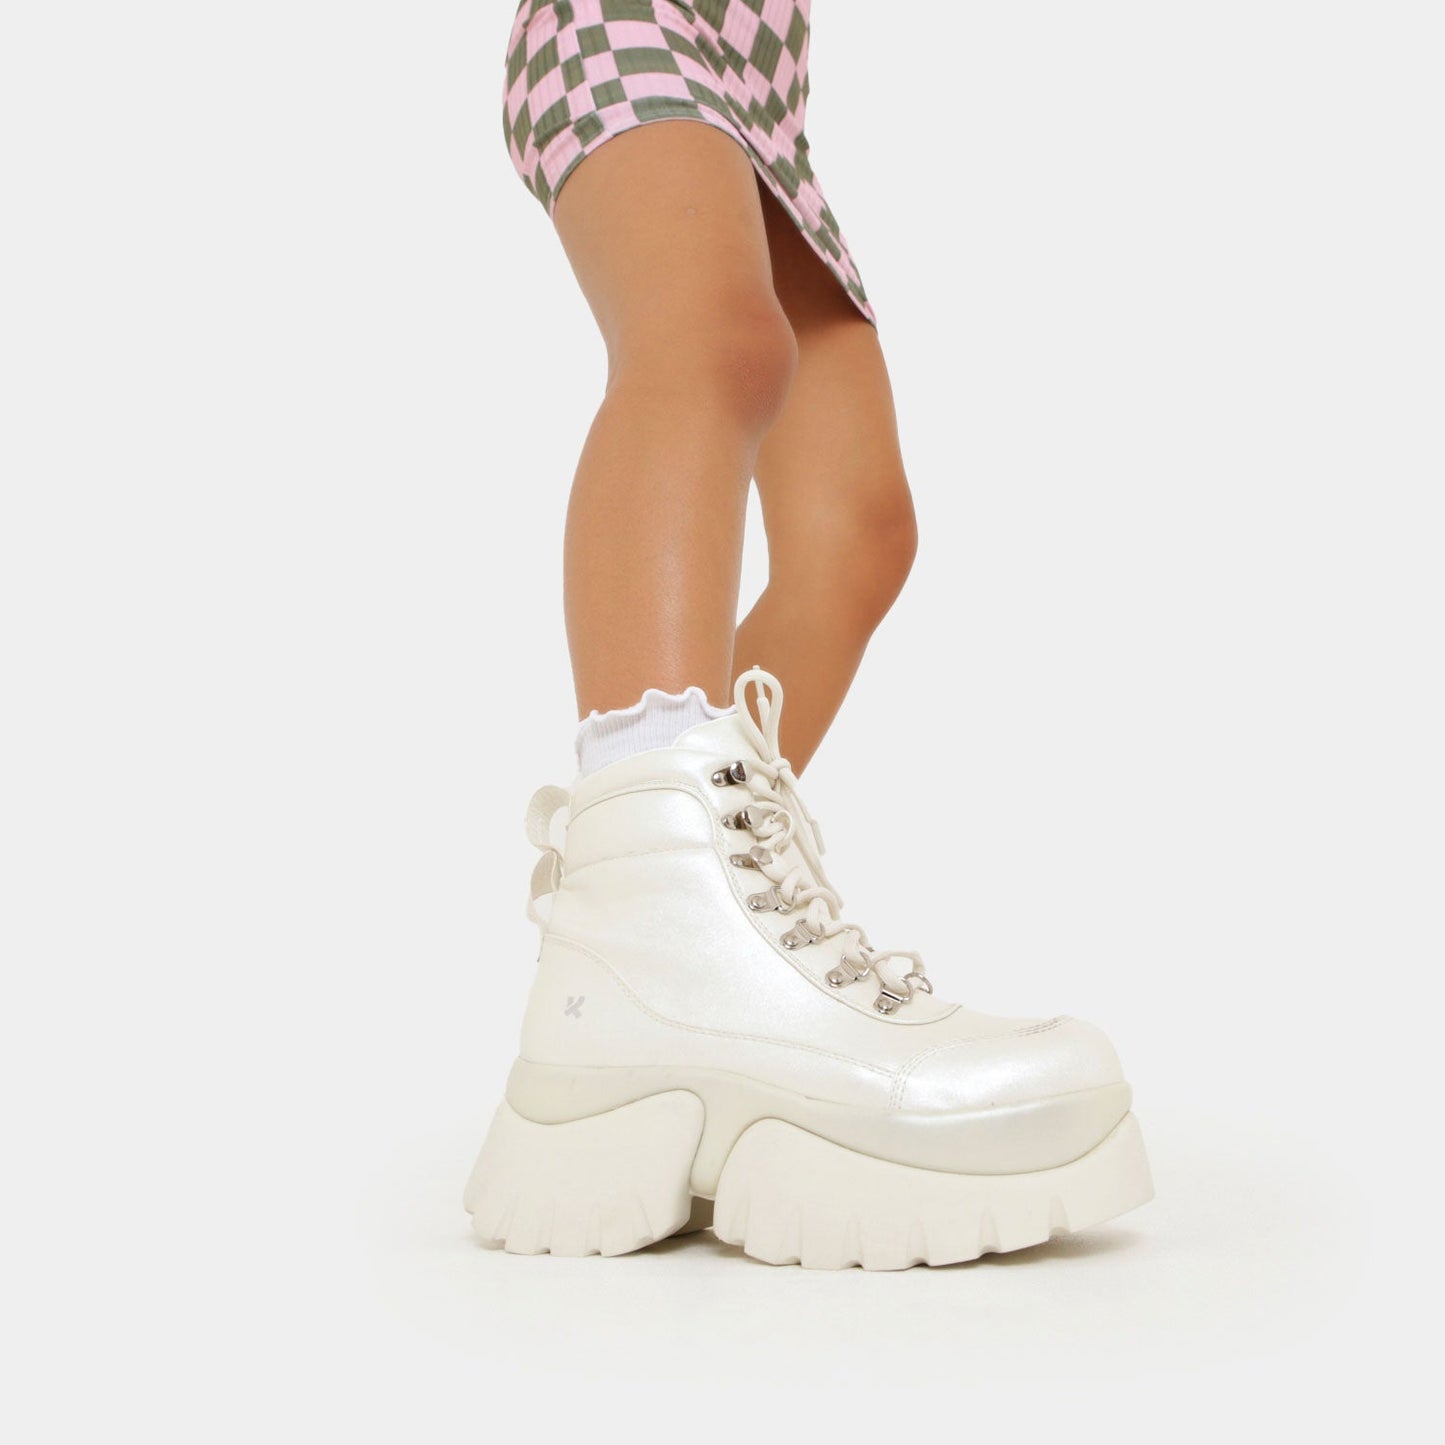 Gooey White Platform Boots - Ankle Boots - KOI Footwear - White - Model Right View